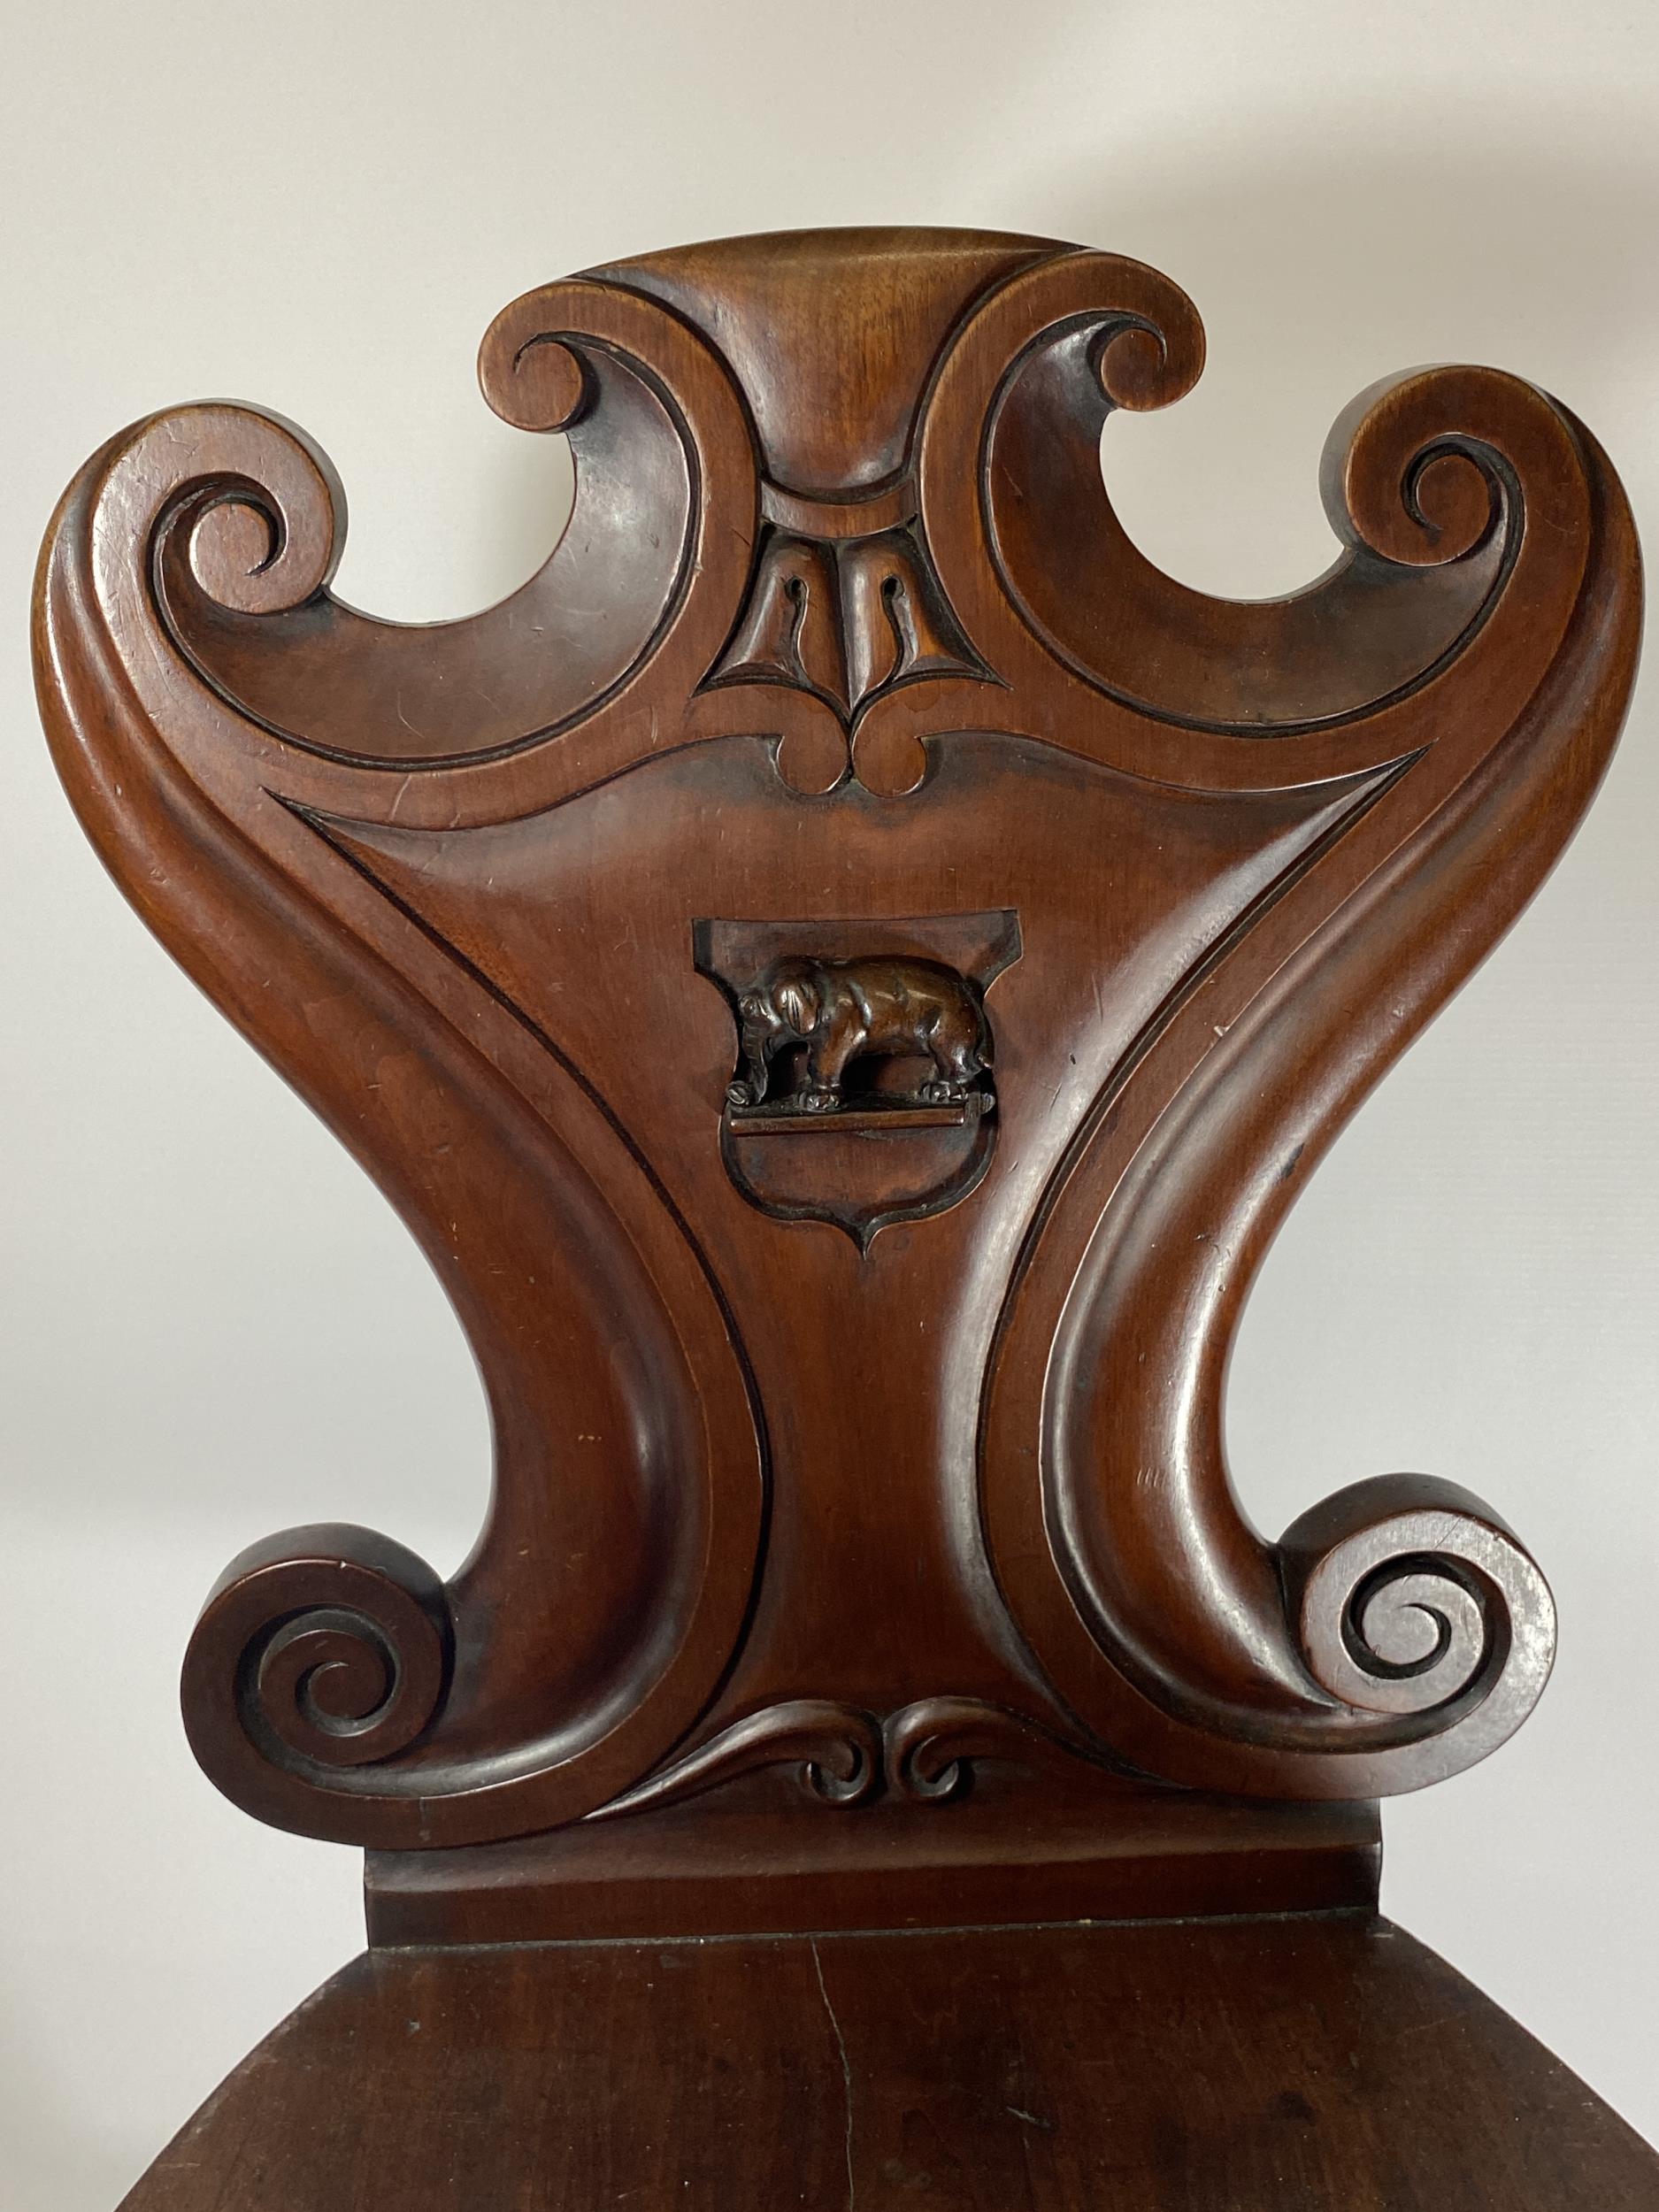 A 19TH CENTURY MAHOGANY CARVED BEDROOM CHAIR WITH ELEPHANT DESIGN BACK - Image 2 of 4